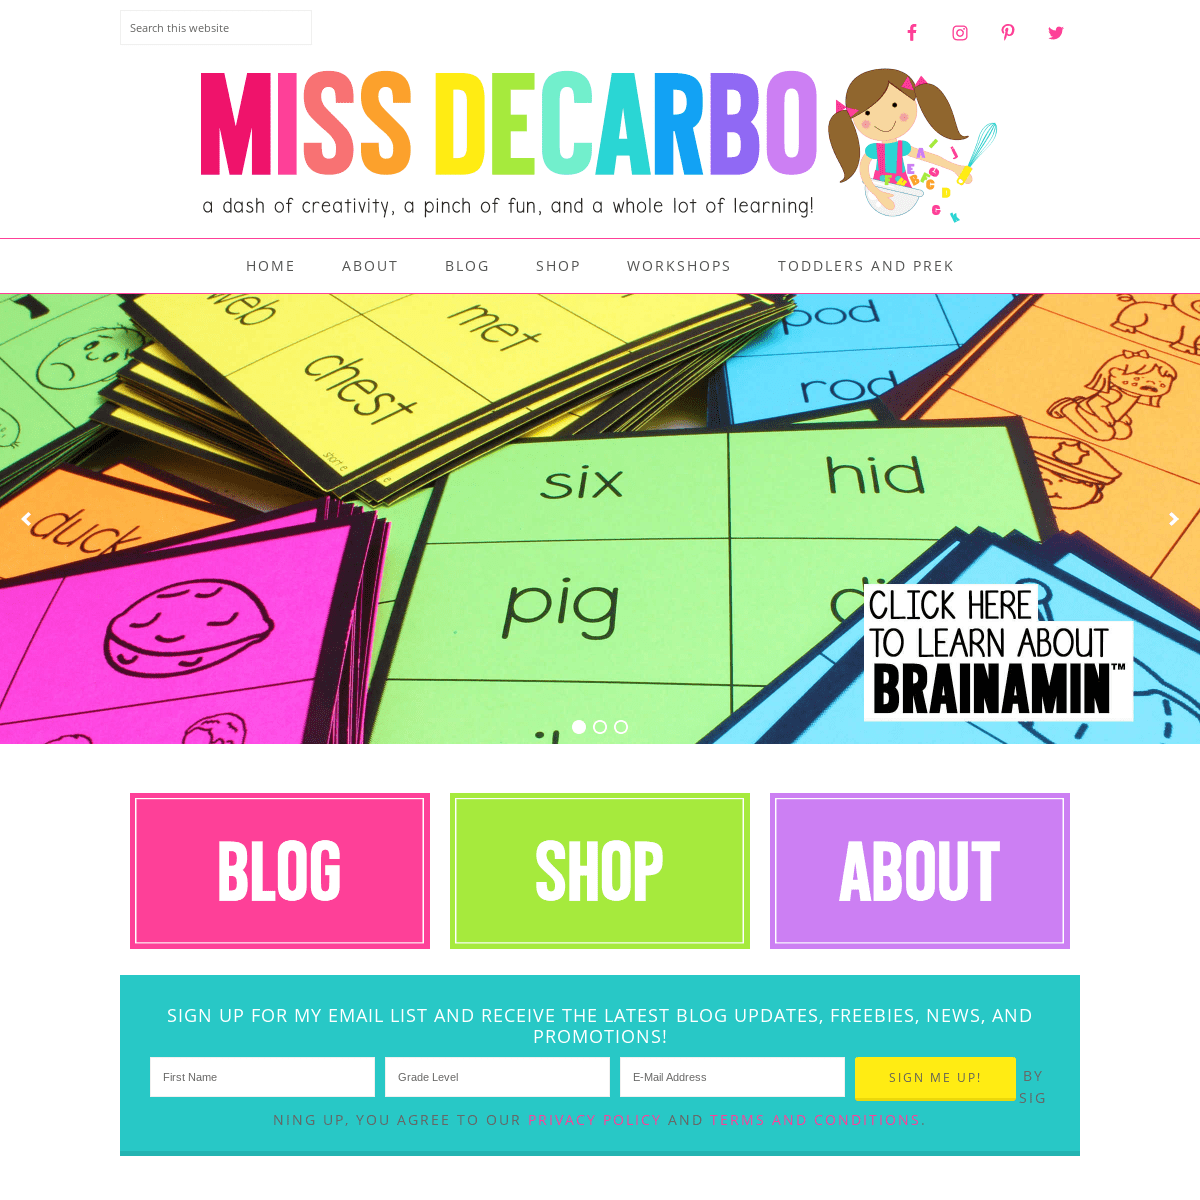 A complete backup of missdecarbo.com